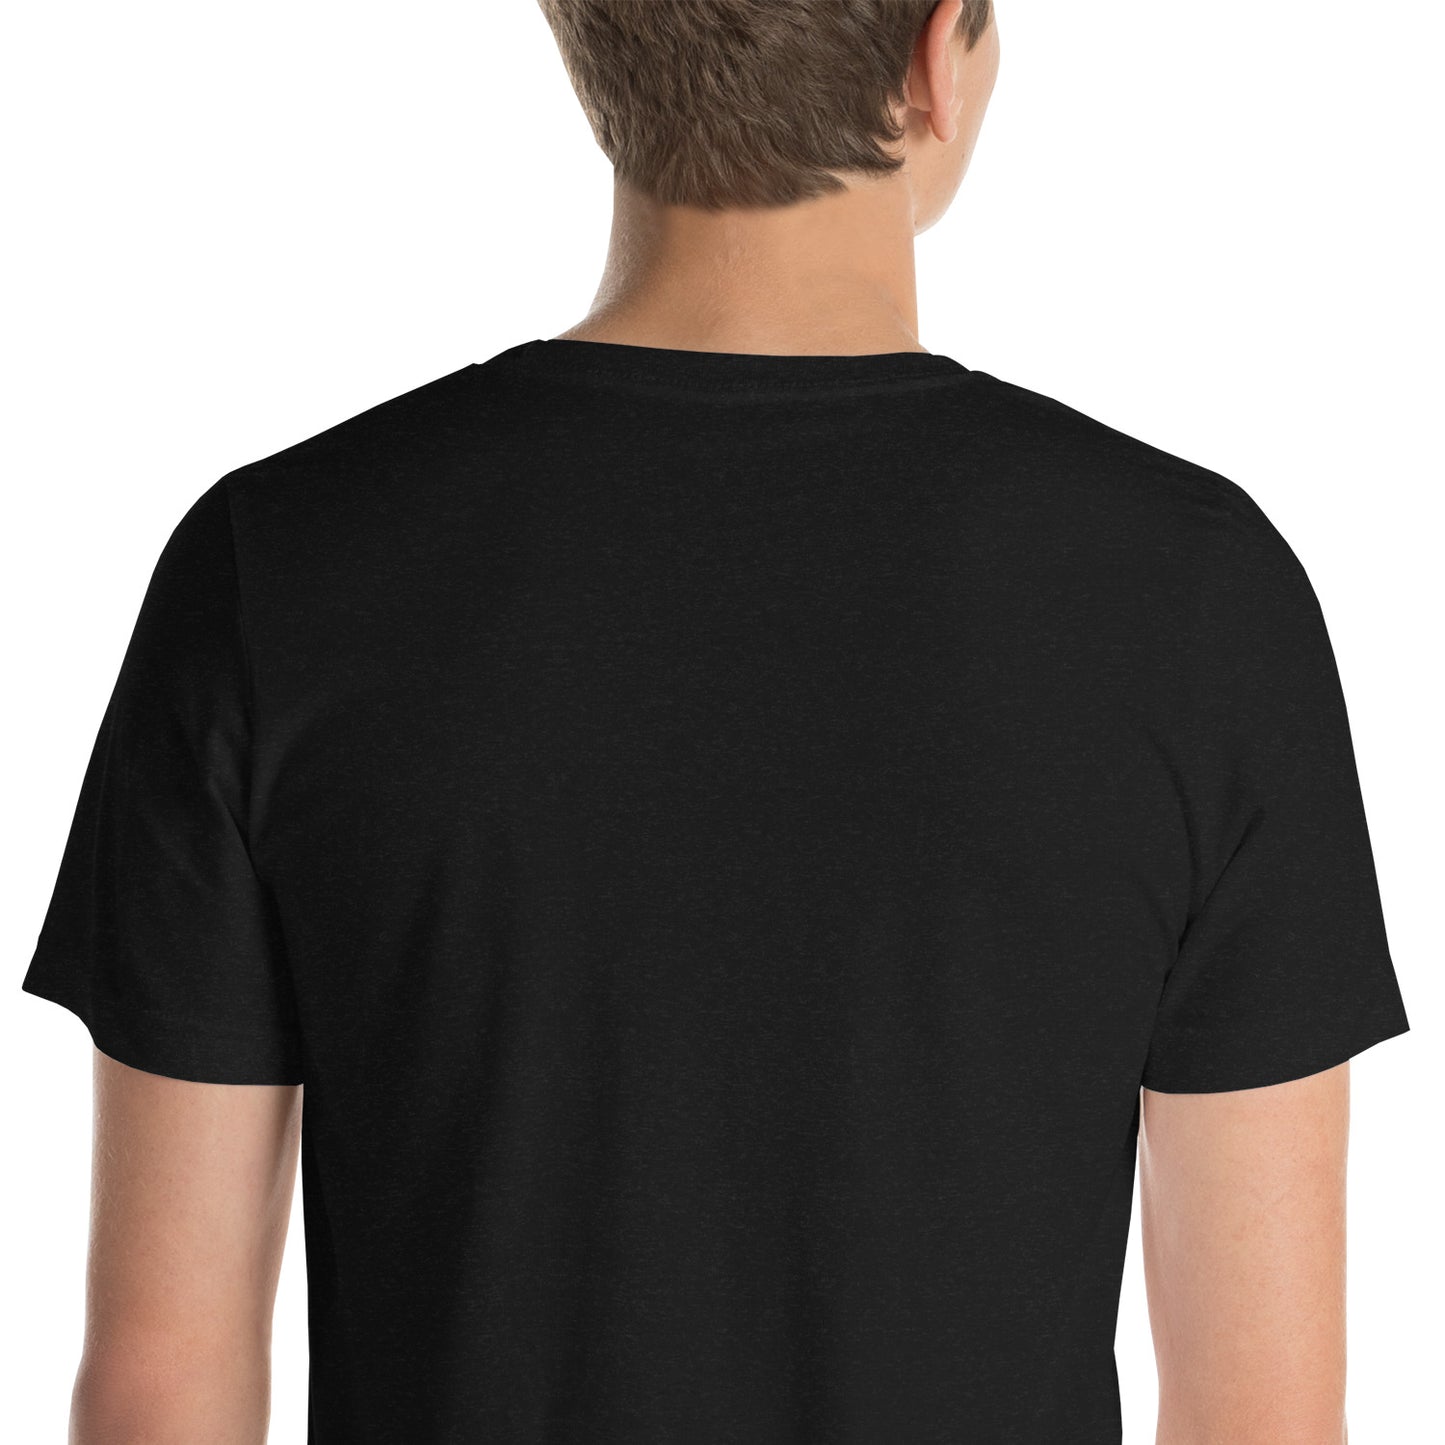 Black Betty -Front Only T-shirt